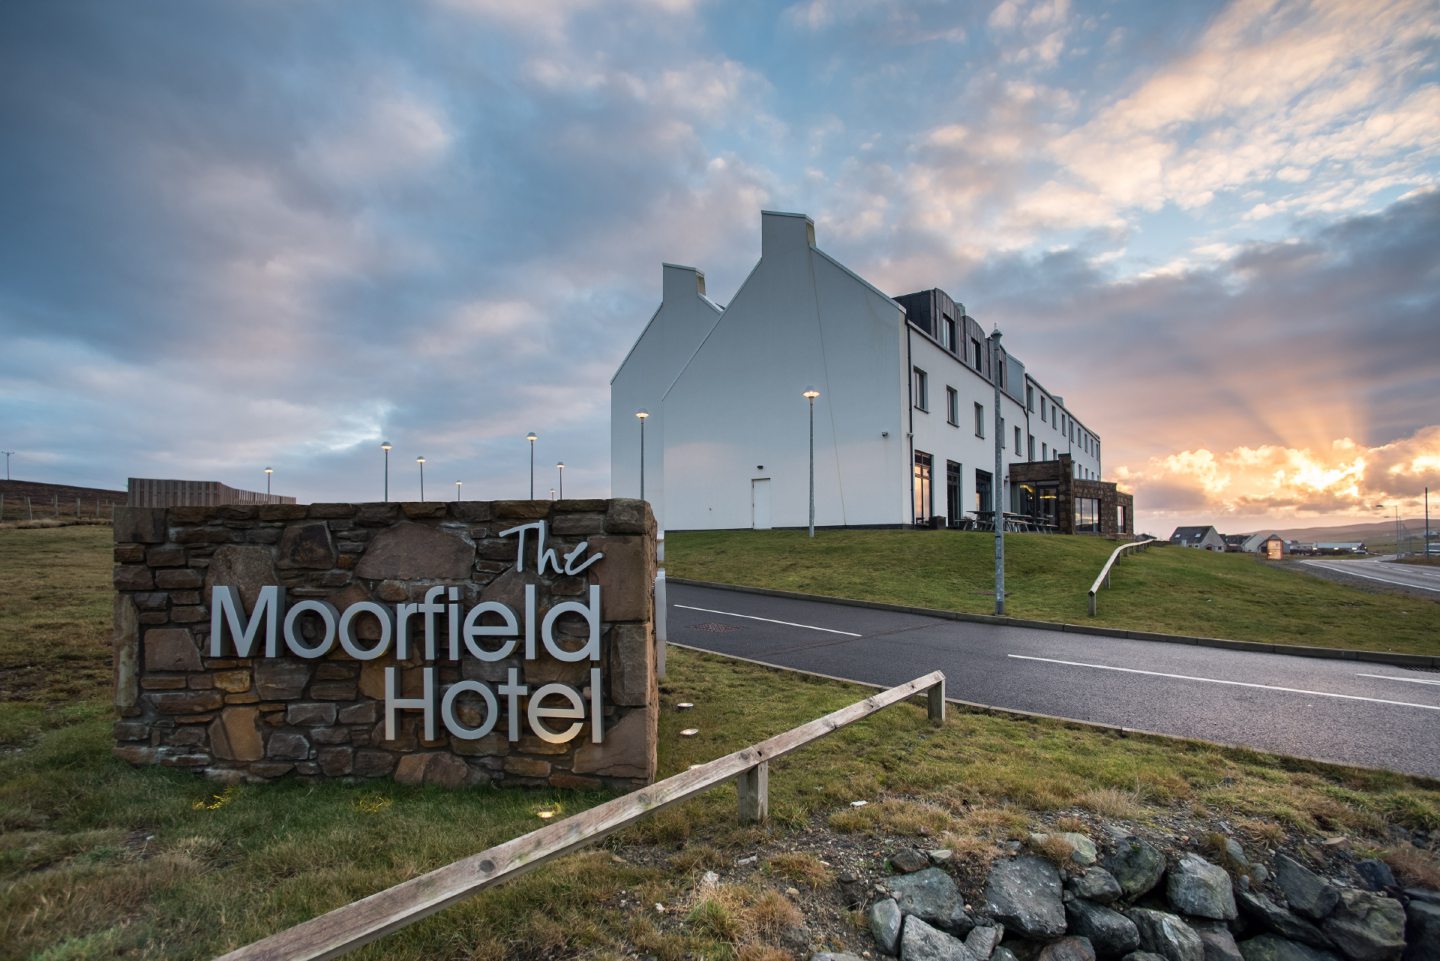 The Moorfield Hotel in Shetland, pictured in 2019.